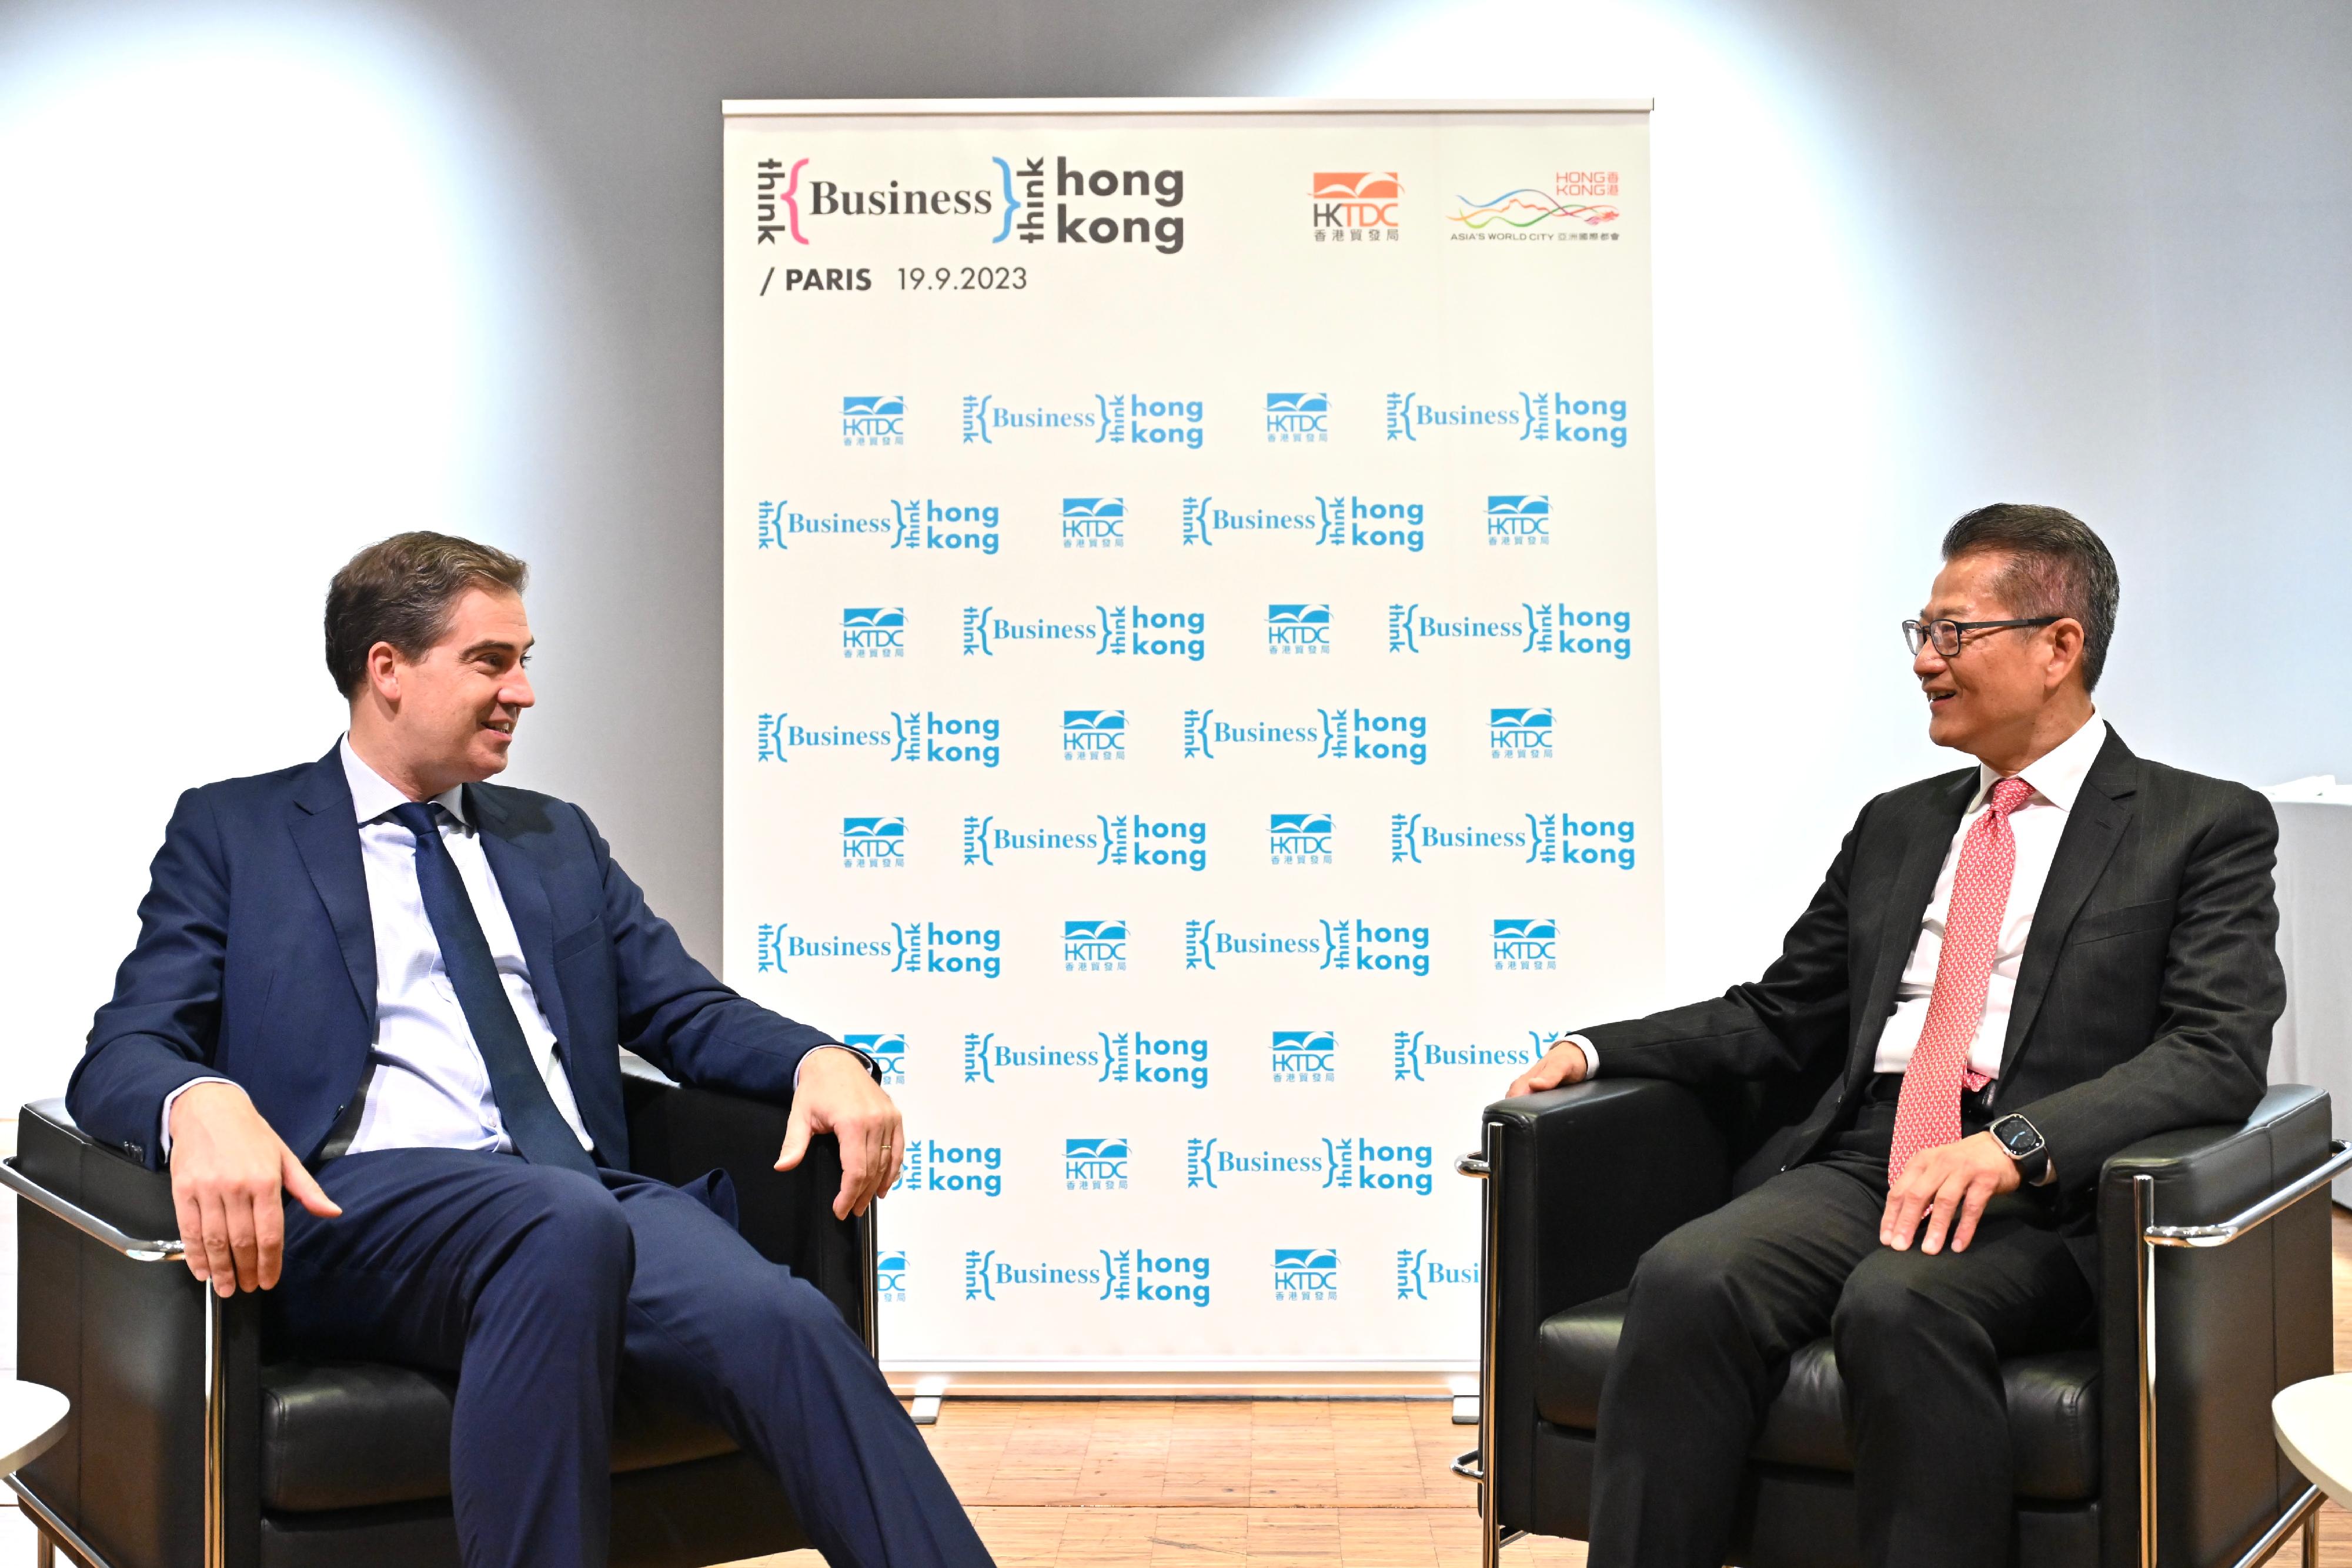 The Financial Secretary, Mr Paul Chan, continued his visit to Paris, France, today (September 19, Paris time). At the Think Business Think Hong Kong Symposium he attended this morning, Mr Chan introduced the new developments and advantages of Hong Kong to industrial and commercial sectors in France. Photo shows Mr Chan (right) meeting with the Minister for Foreign Trade, Economic Attractiveness and French Nationals Abroad, Mr Olivier Becht (left), before the symposium.